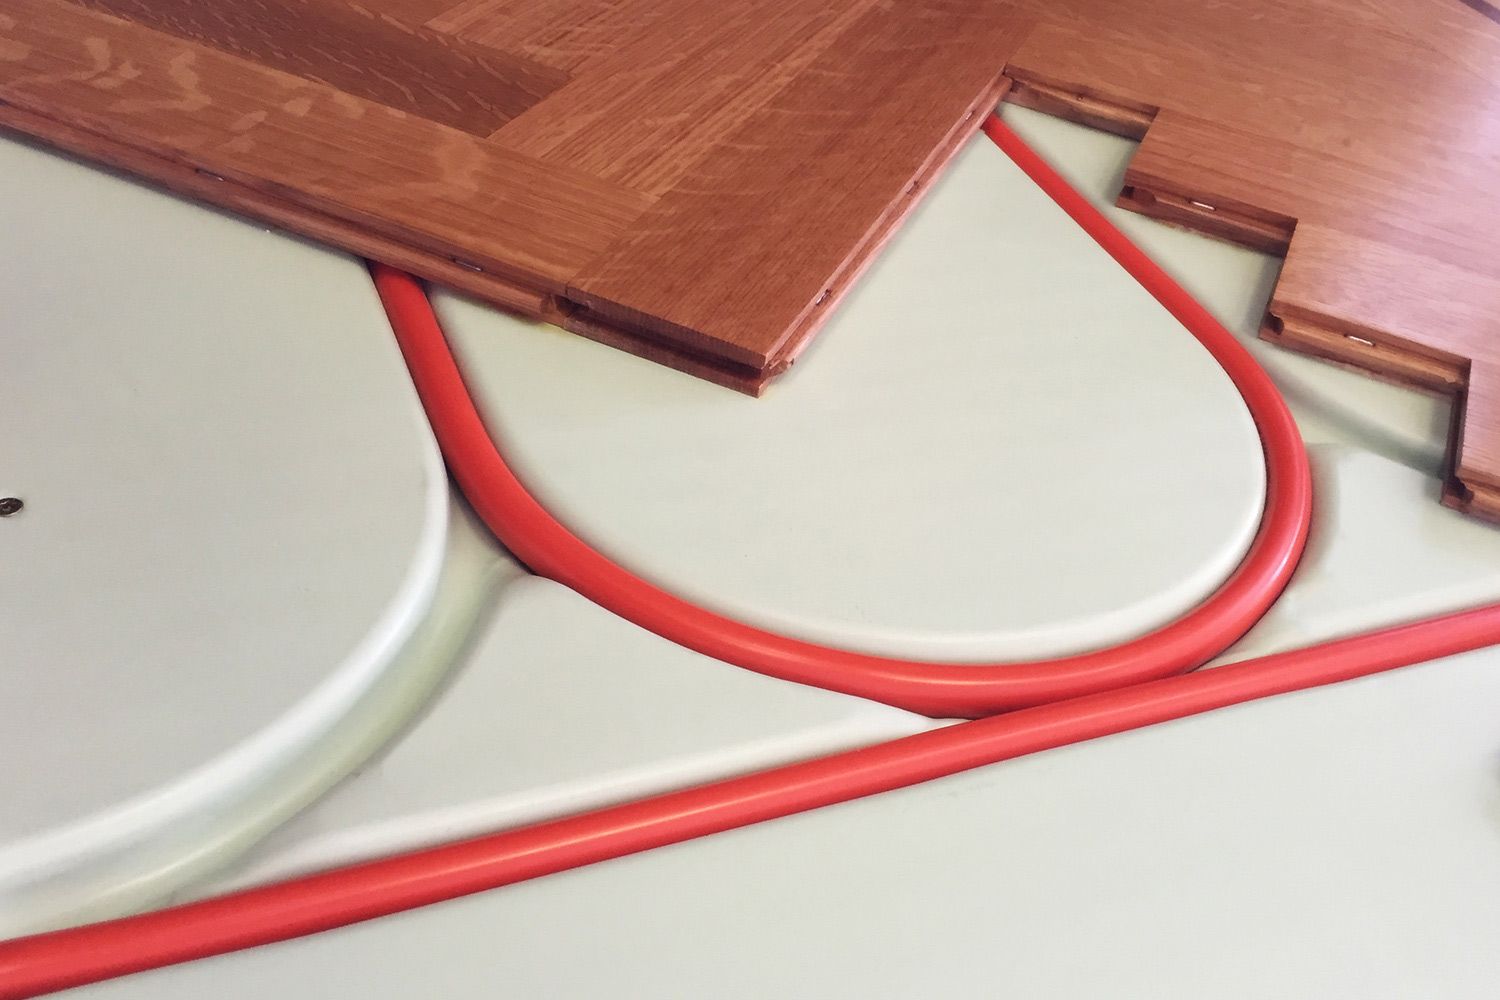 Electric Floor Heating How To Install, Can You Put Hardwood Floor Over Radiant Heat